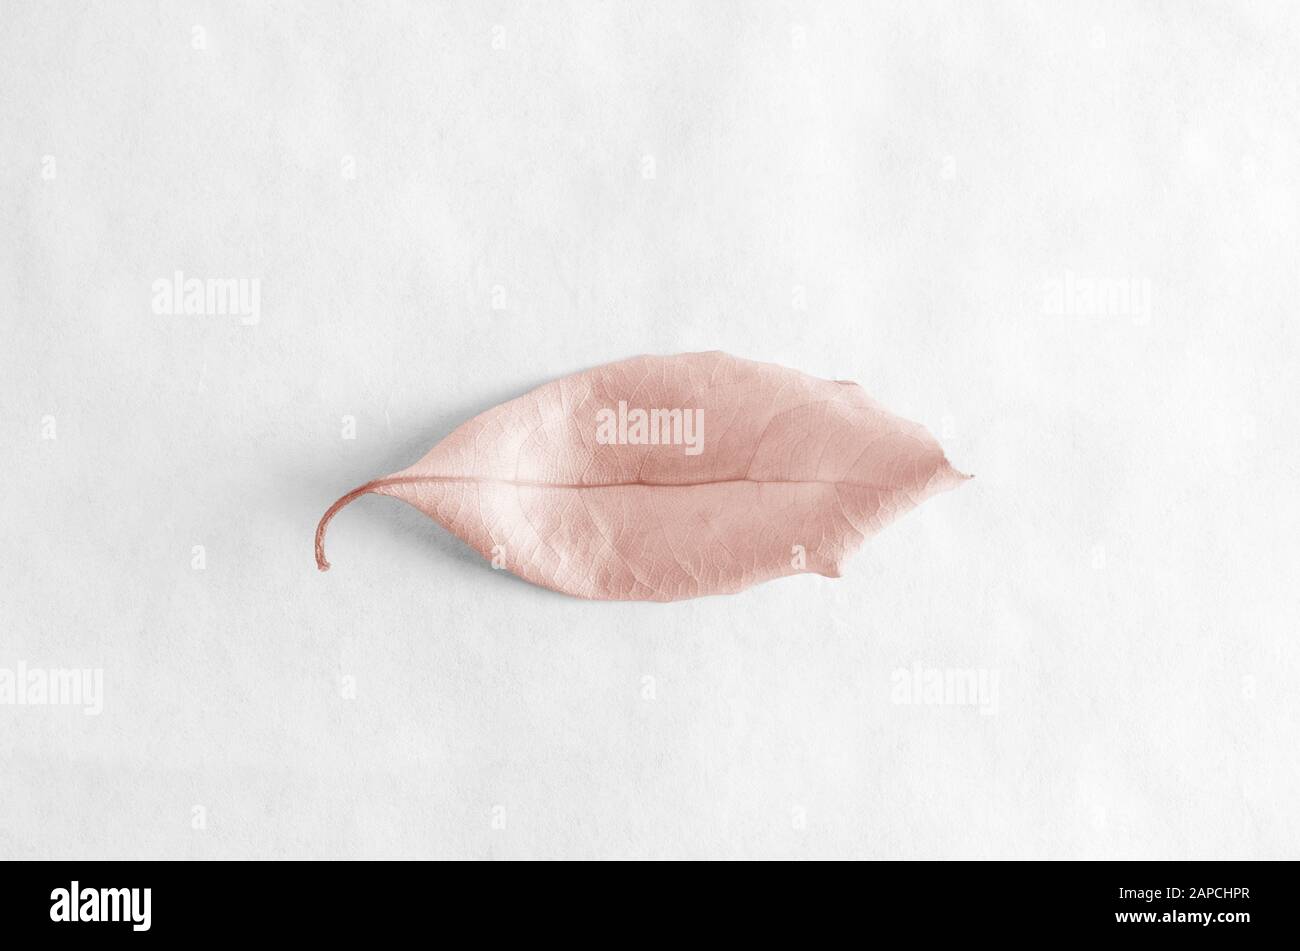 A single pink tinted leaf on paper background. Stock Photo